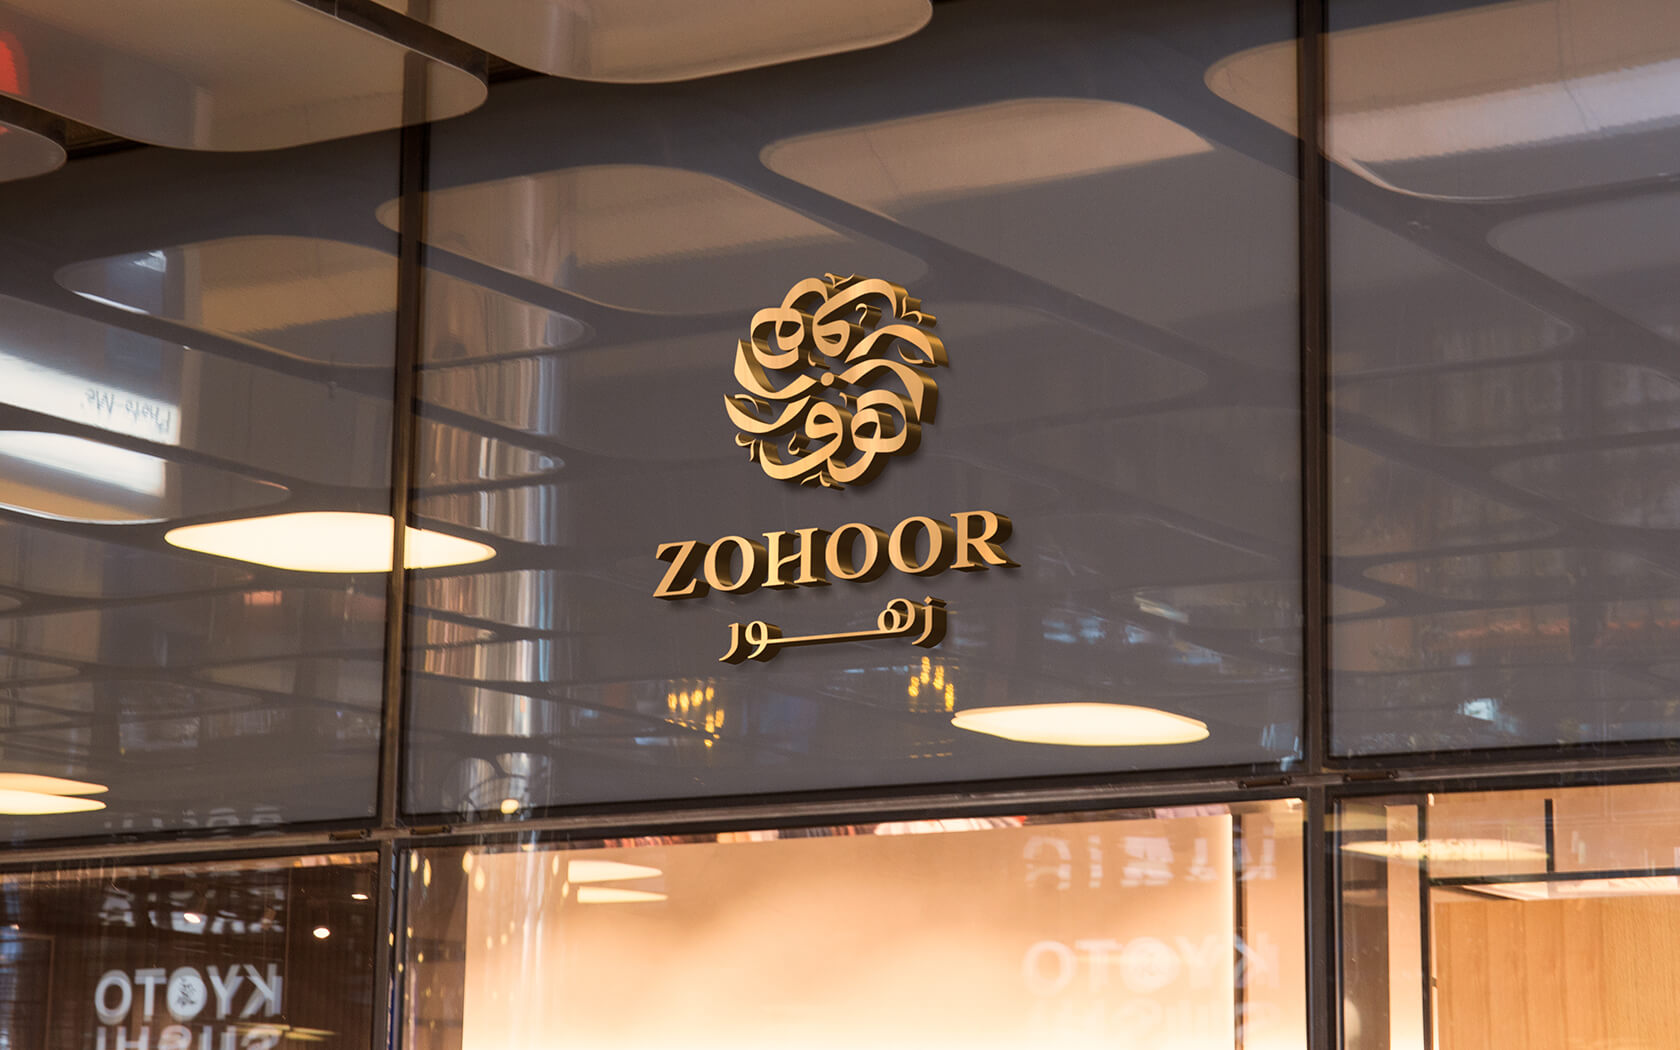 Zohoor. Main entrance sign with brand logo